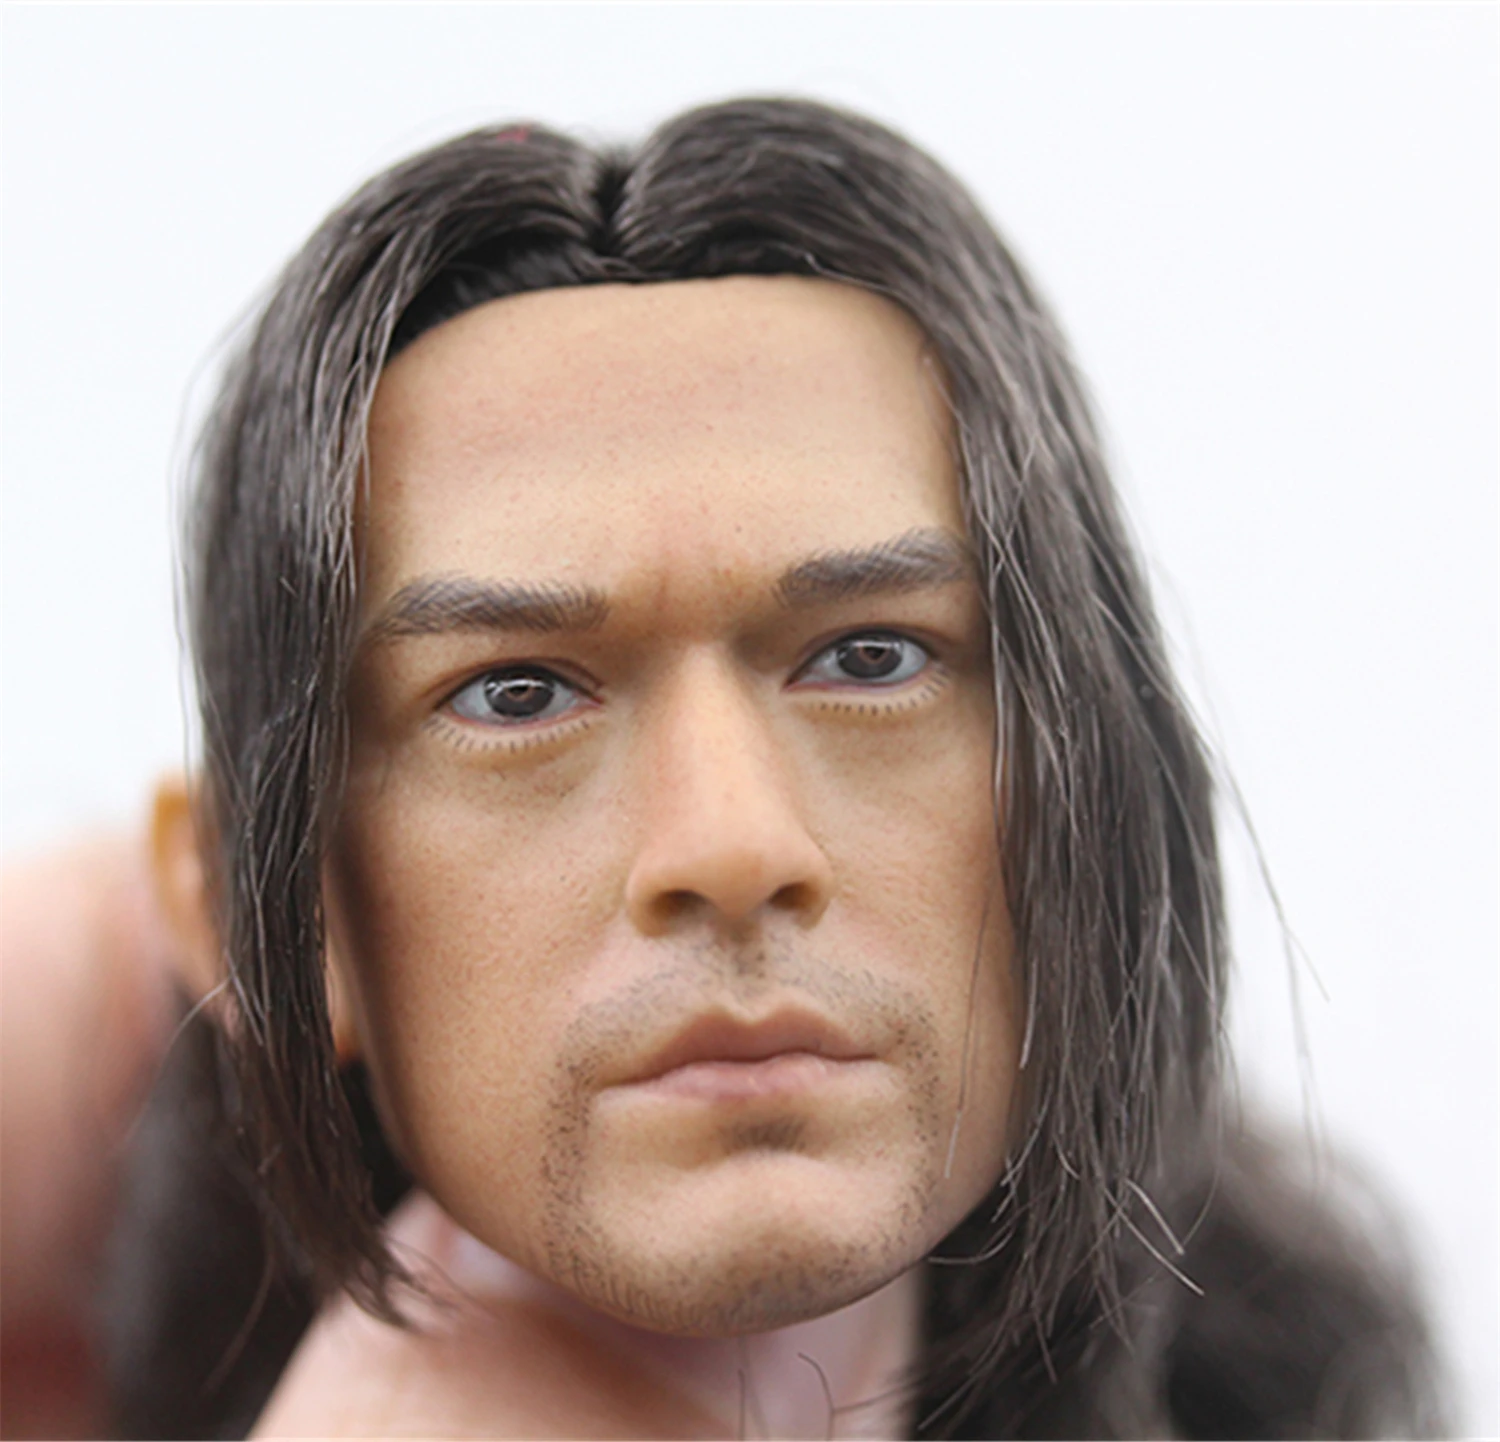 

1/6 Scale Head Carving Takeshi Kaneshiro Asian Male Soldier Star Hair Transplant Model PVC 12Inch Action Figure Body Doll "